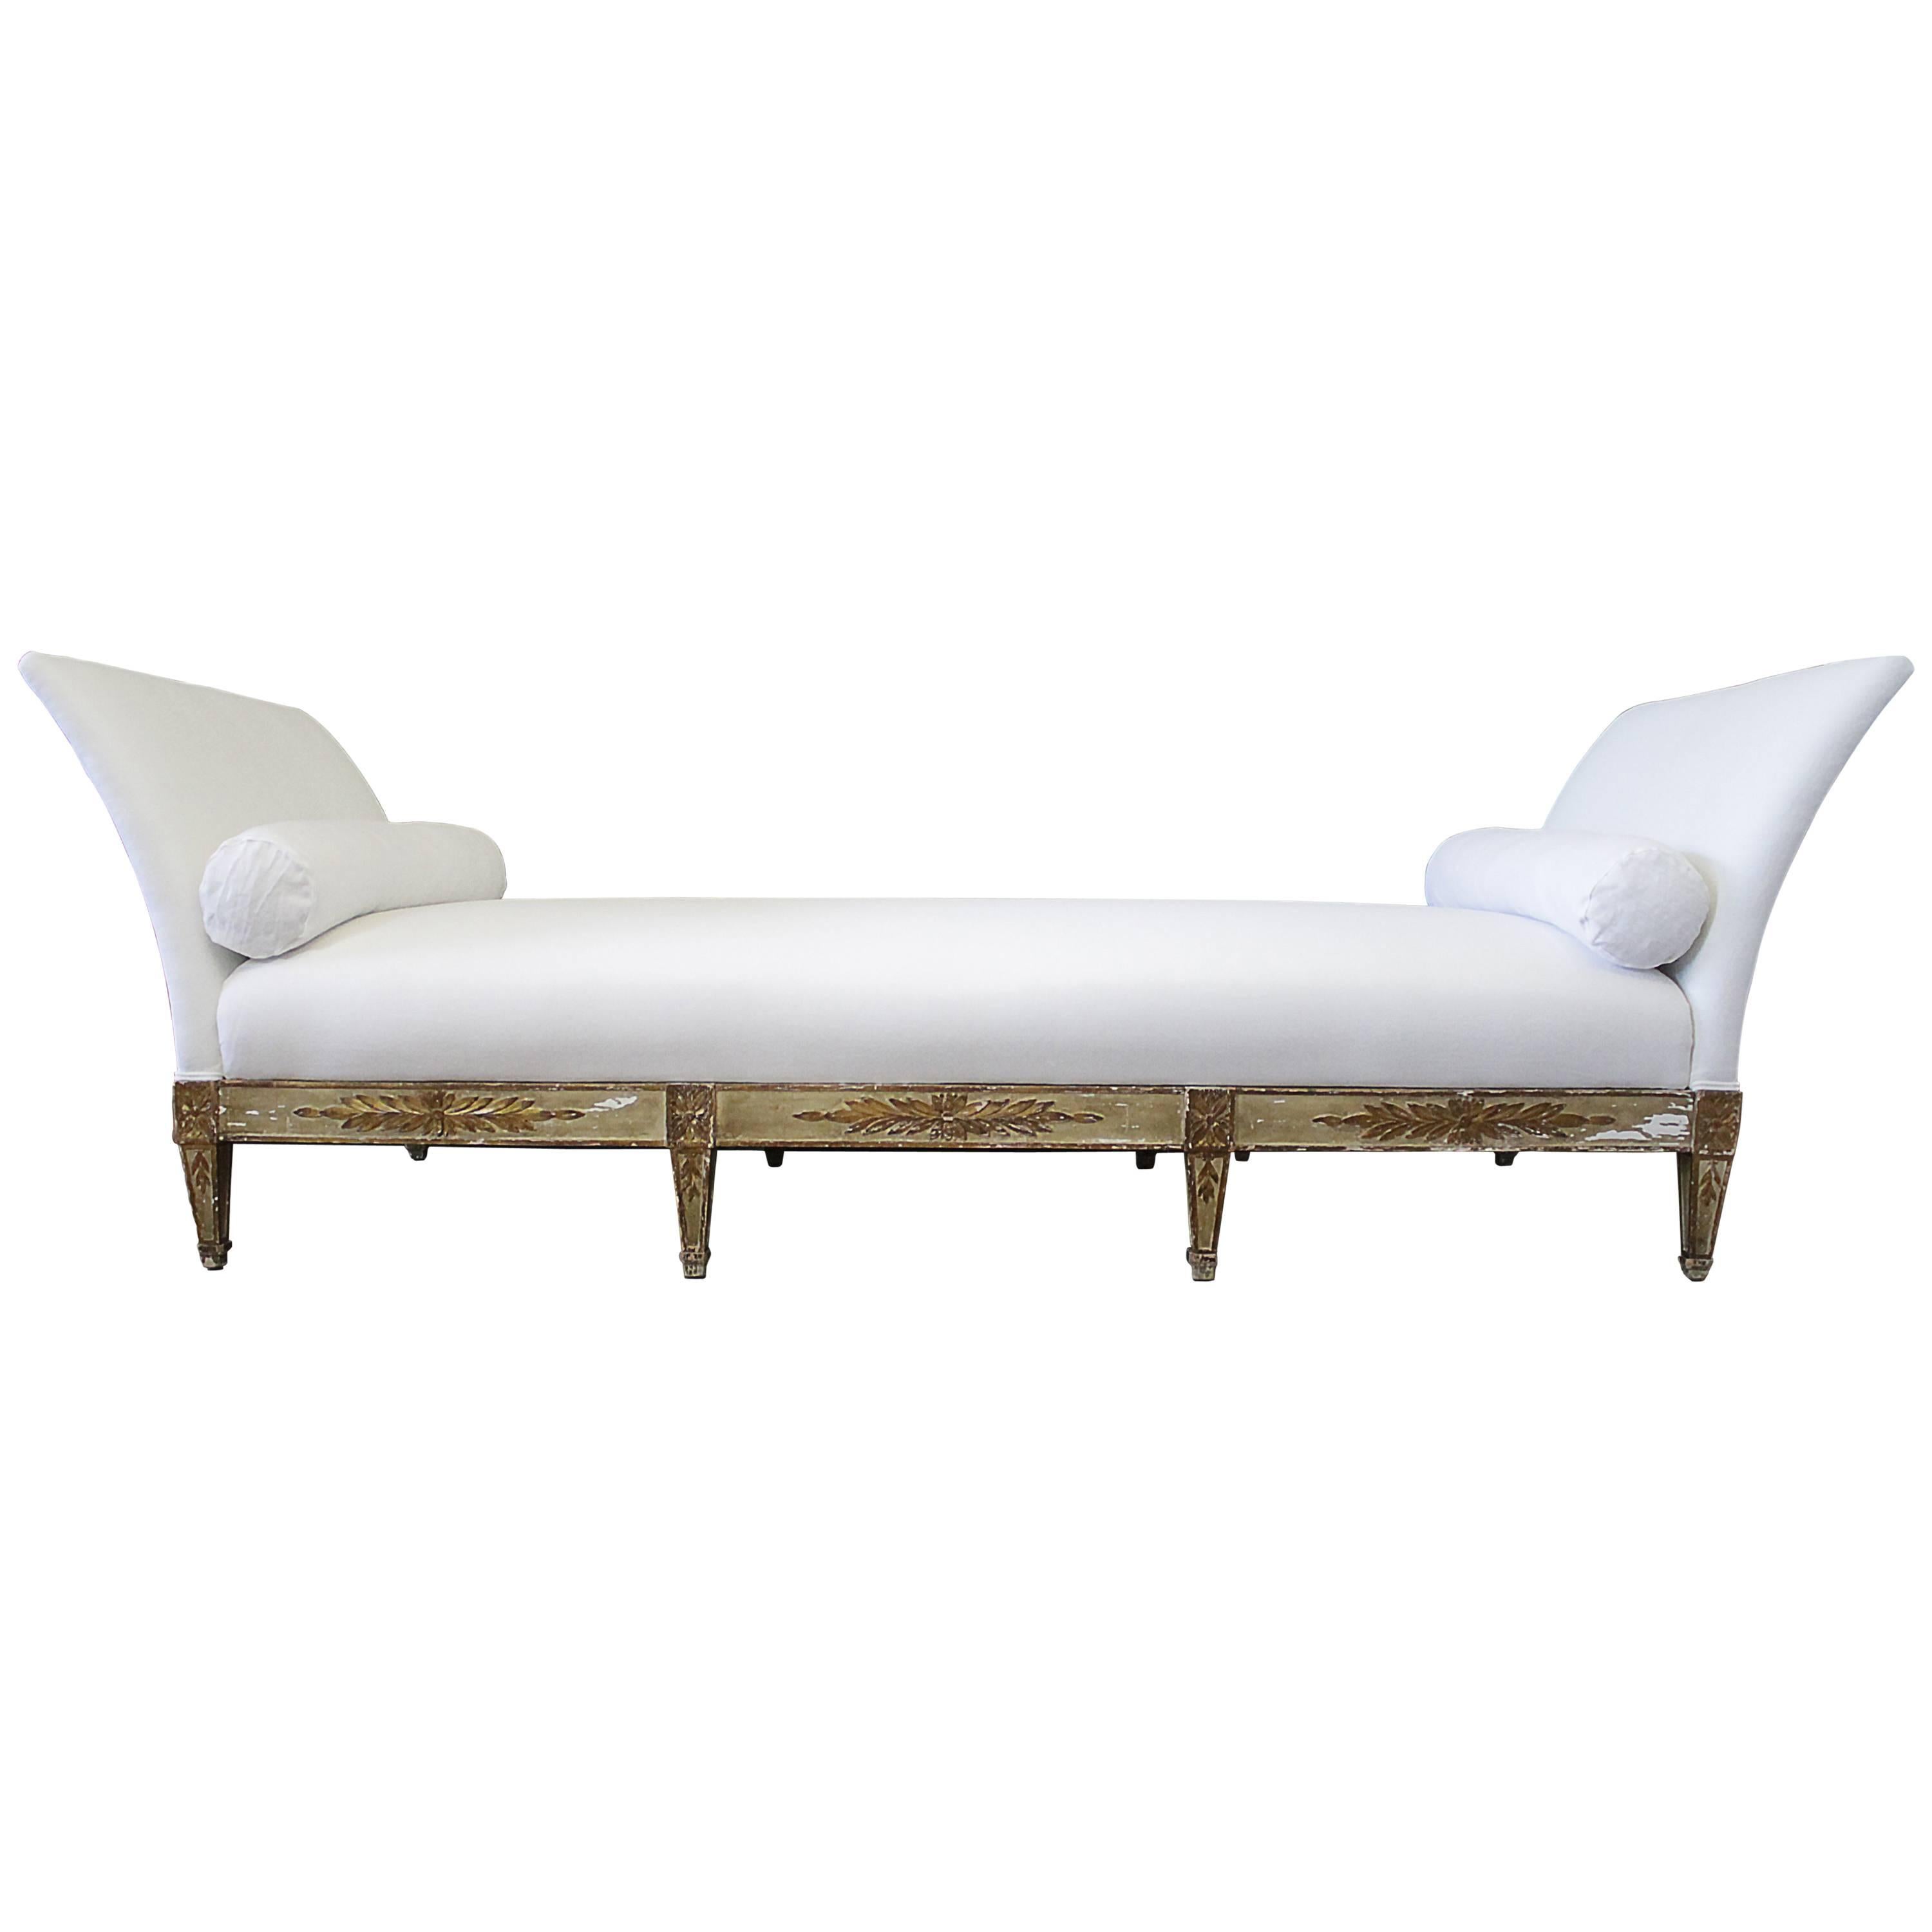 Early 20th Century Italian Style White Linen Upholstered Daybed